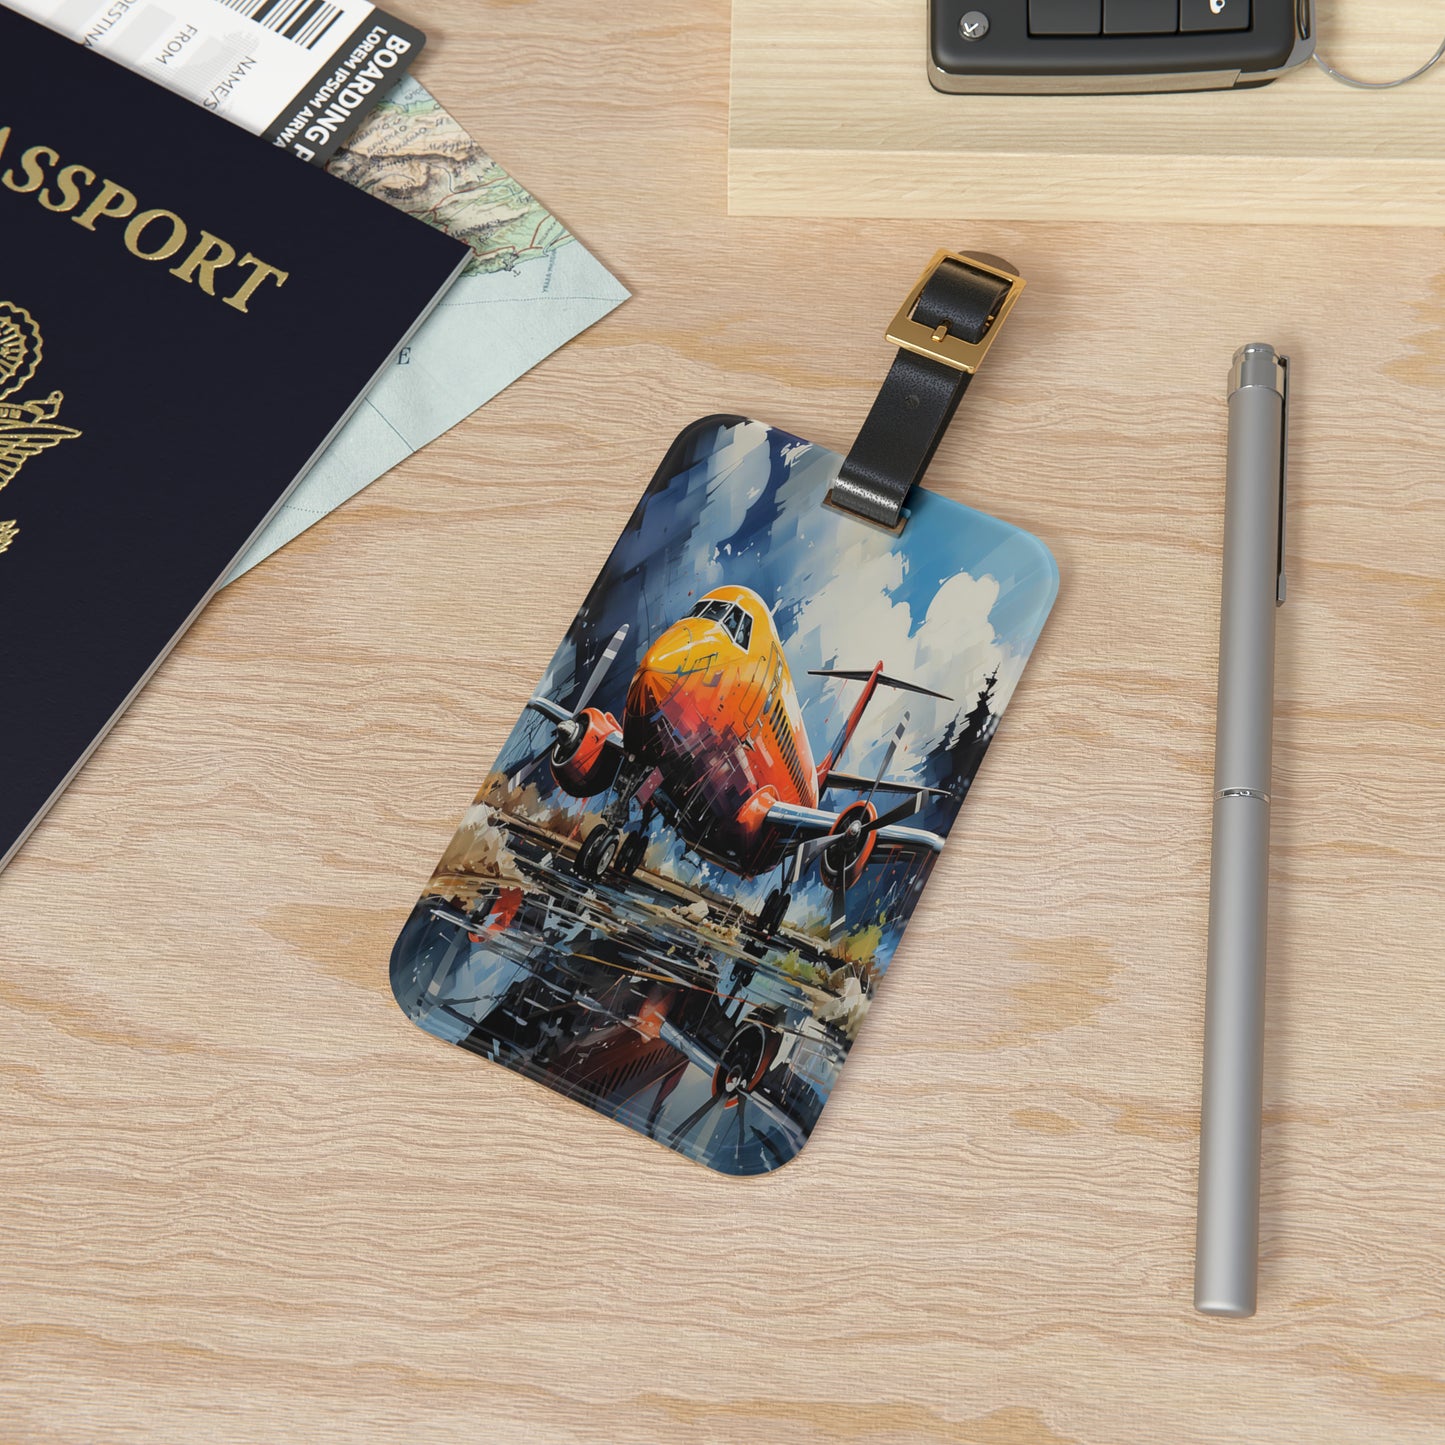 Aviator's Dream Luggage Tag | Artistic Journey Collection | Christmas Vacation | Luggage Tags | Travel Tags